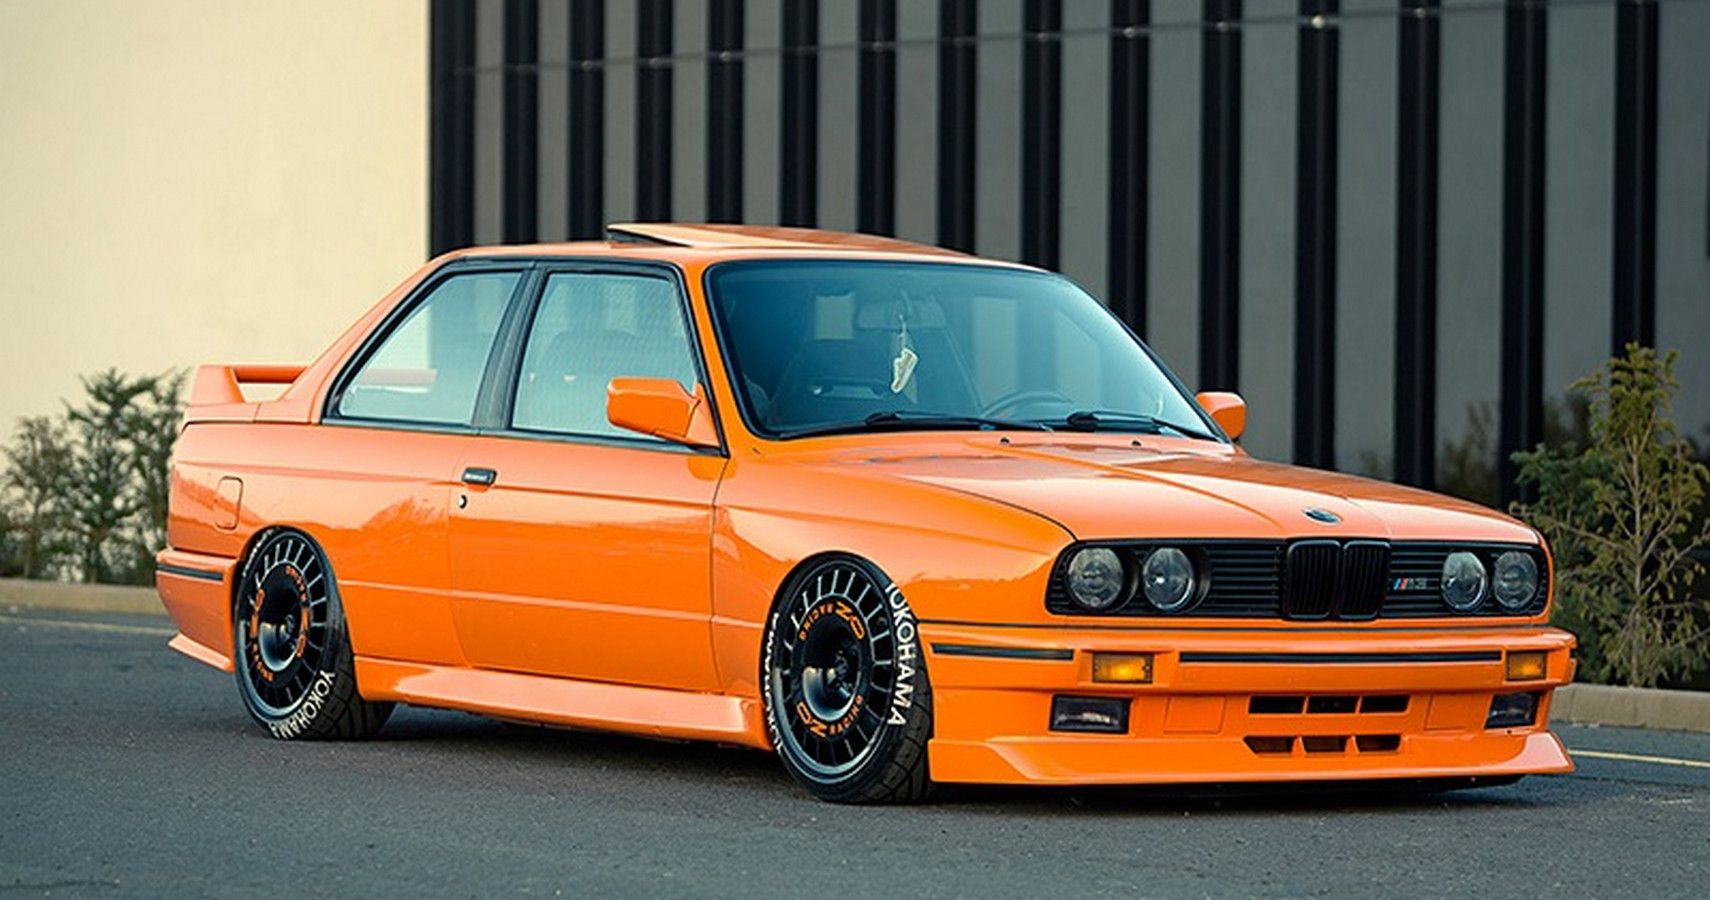 10 Coolest Project Cars We'd Pick For A Home Build